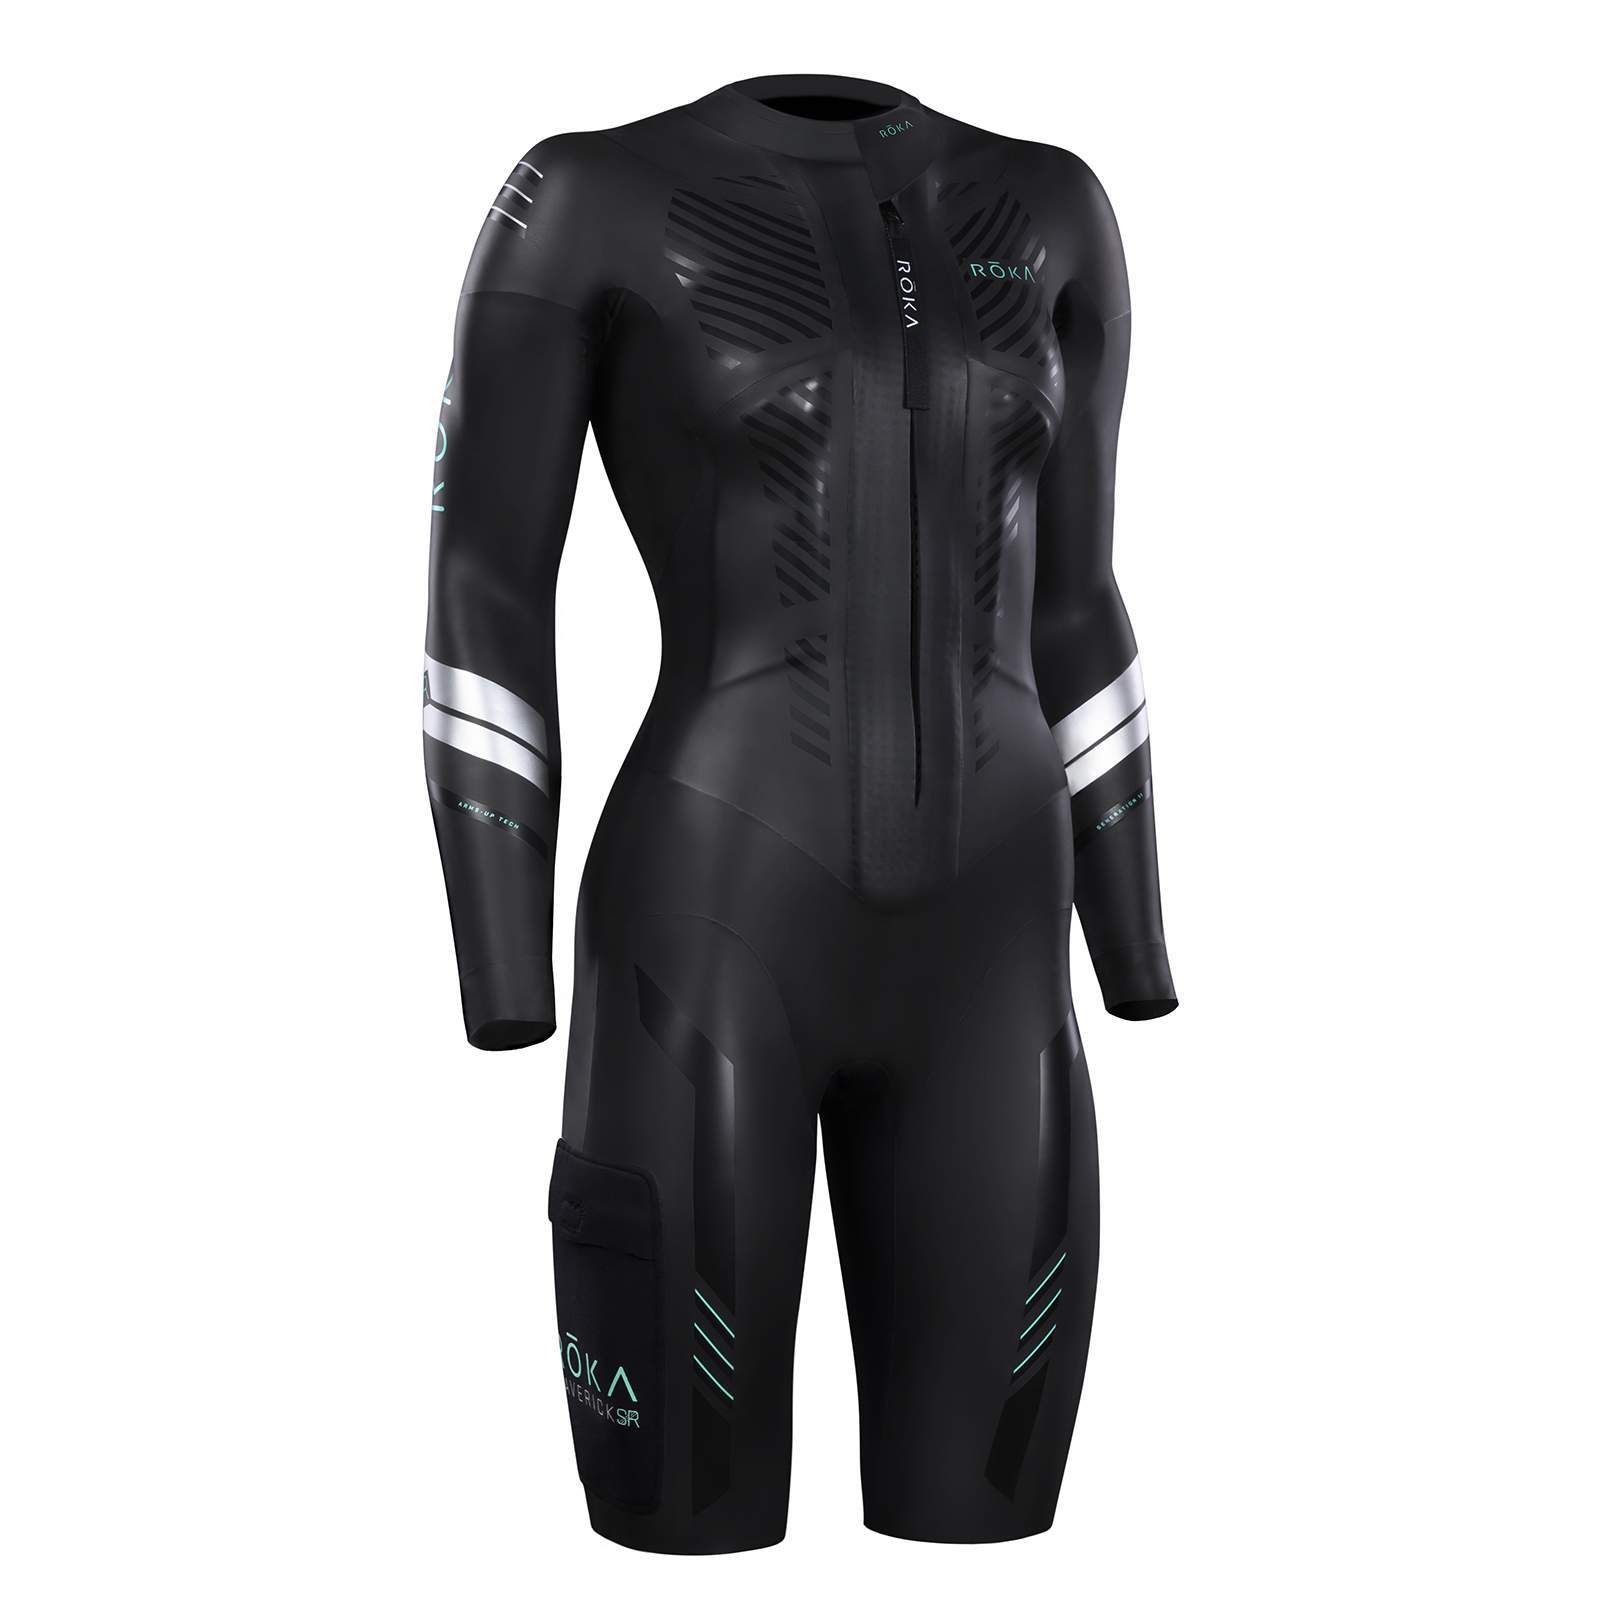 Fjerde grinende Antage SwimRun Wetsuit Reviews - 6 wetsuits - which fits your budget?